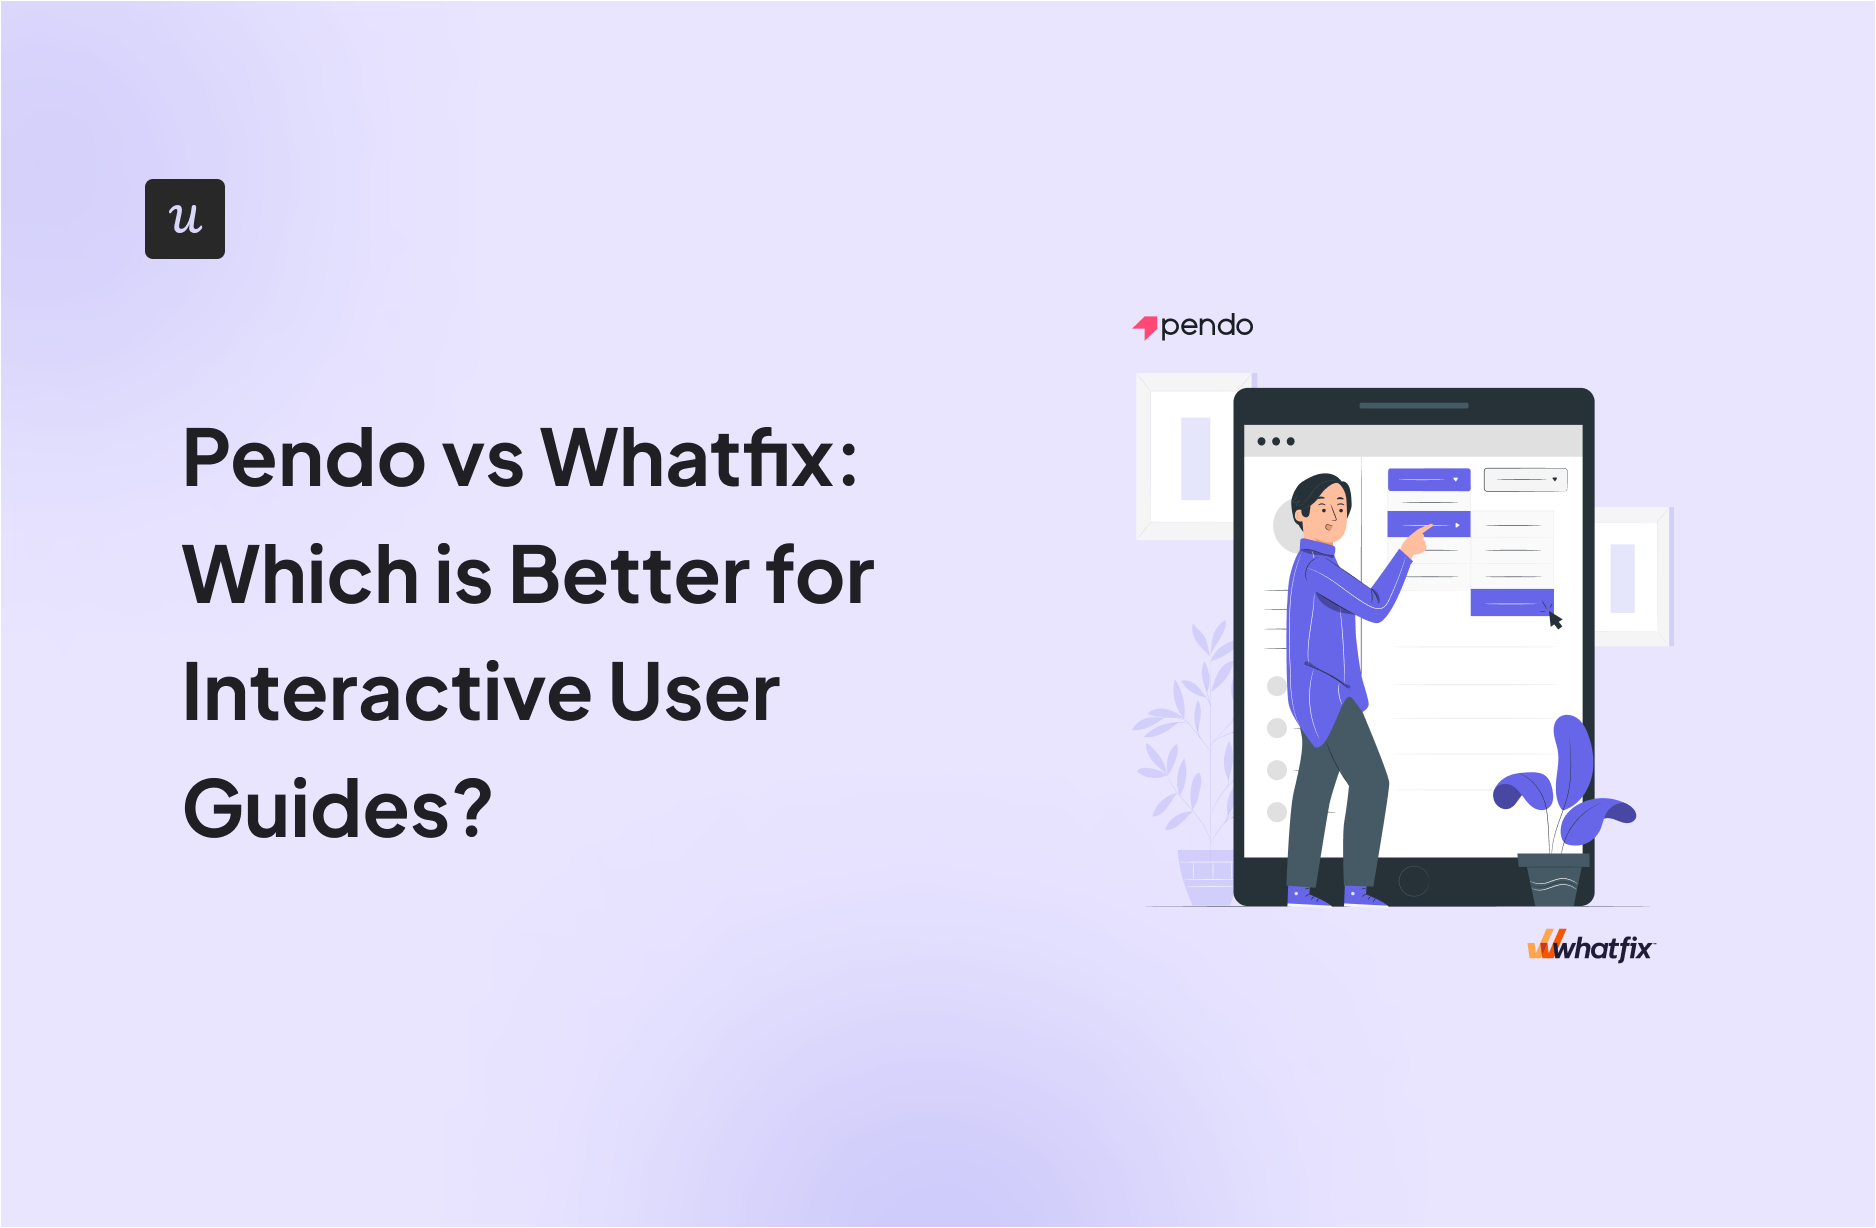 Pendo vs Whatfix: Which is Better for Interactive User Guides?